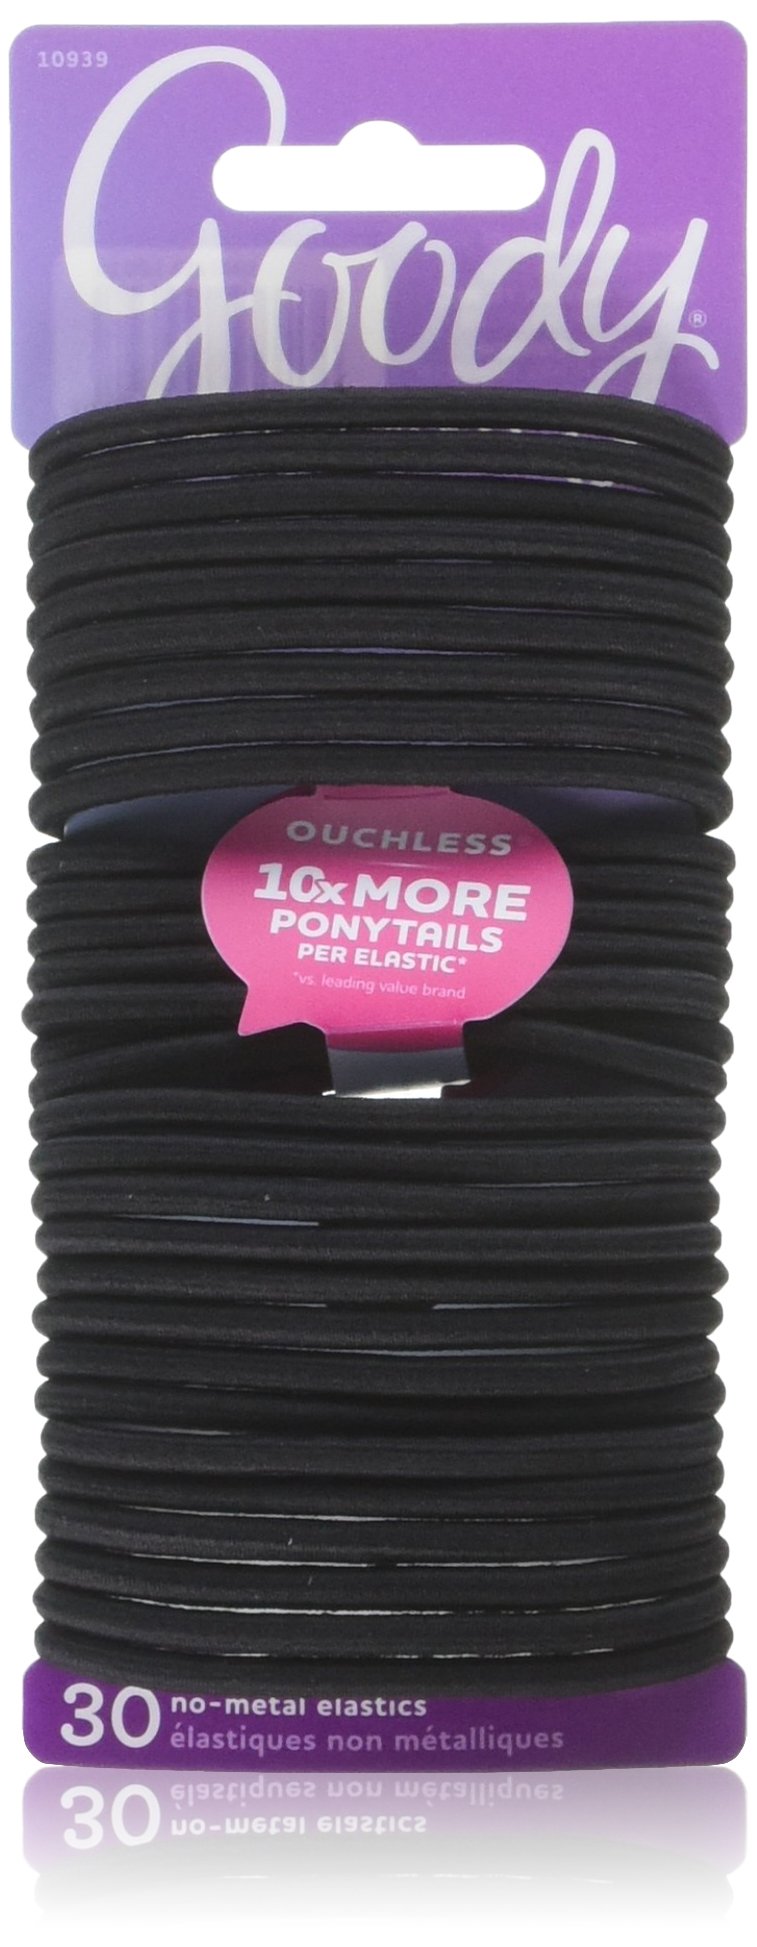 Goody BLACK Ouchless No Metal Elastics - 30 CT